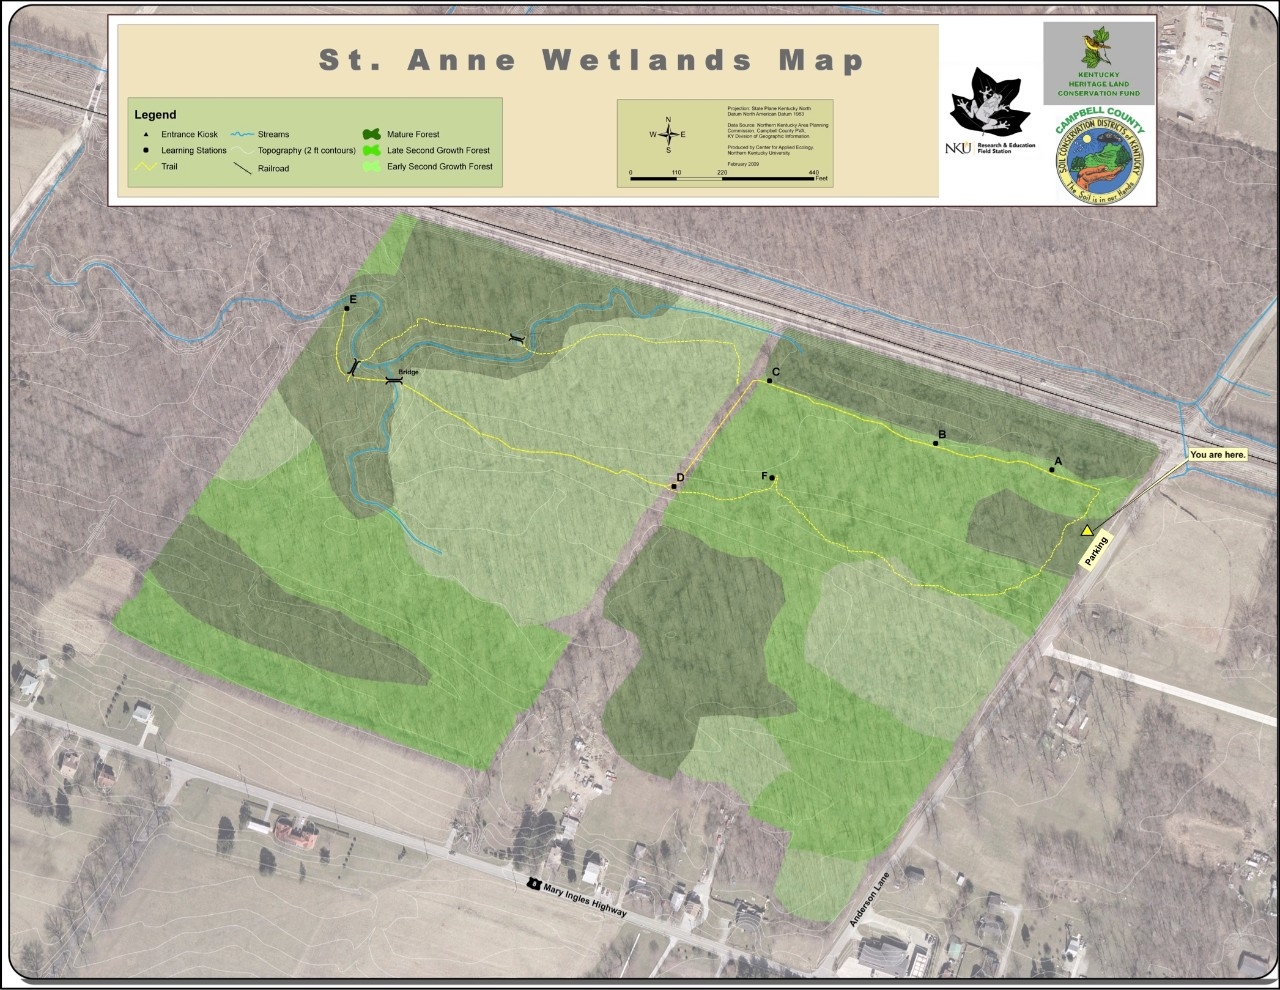 Trail map of the St. Anne Wetlands south trail that is open to the public.